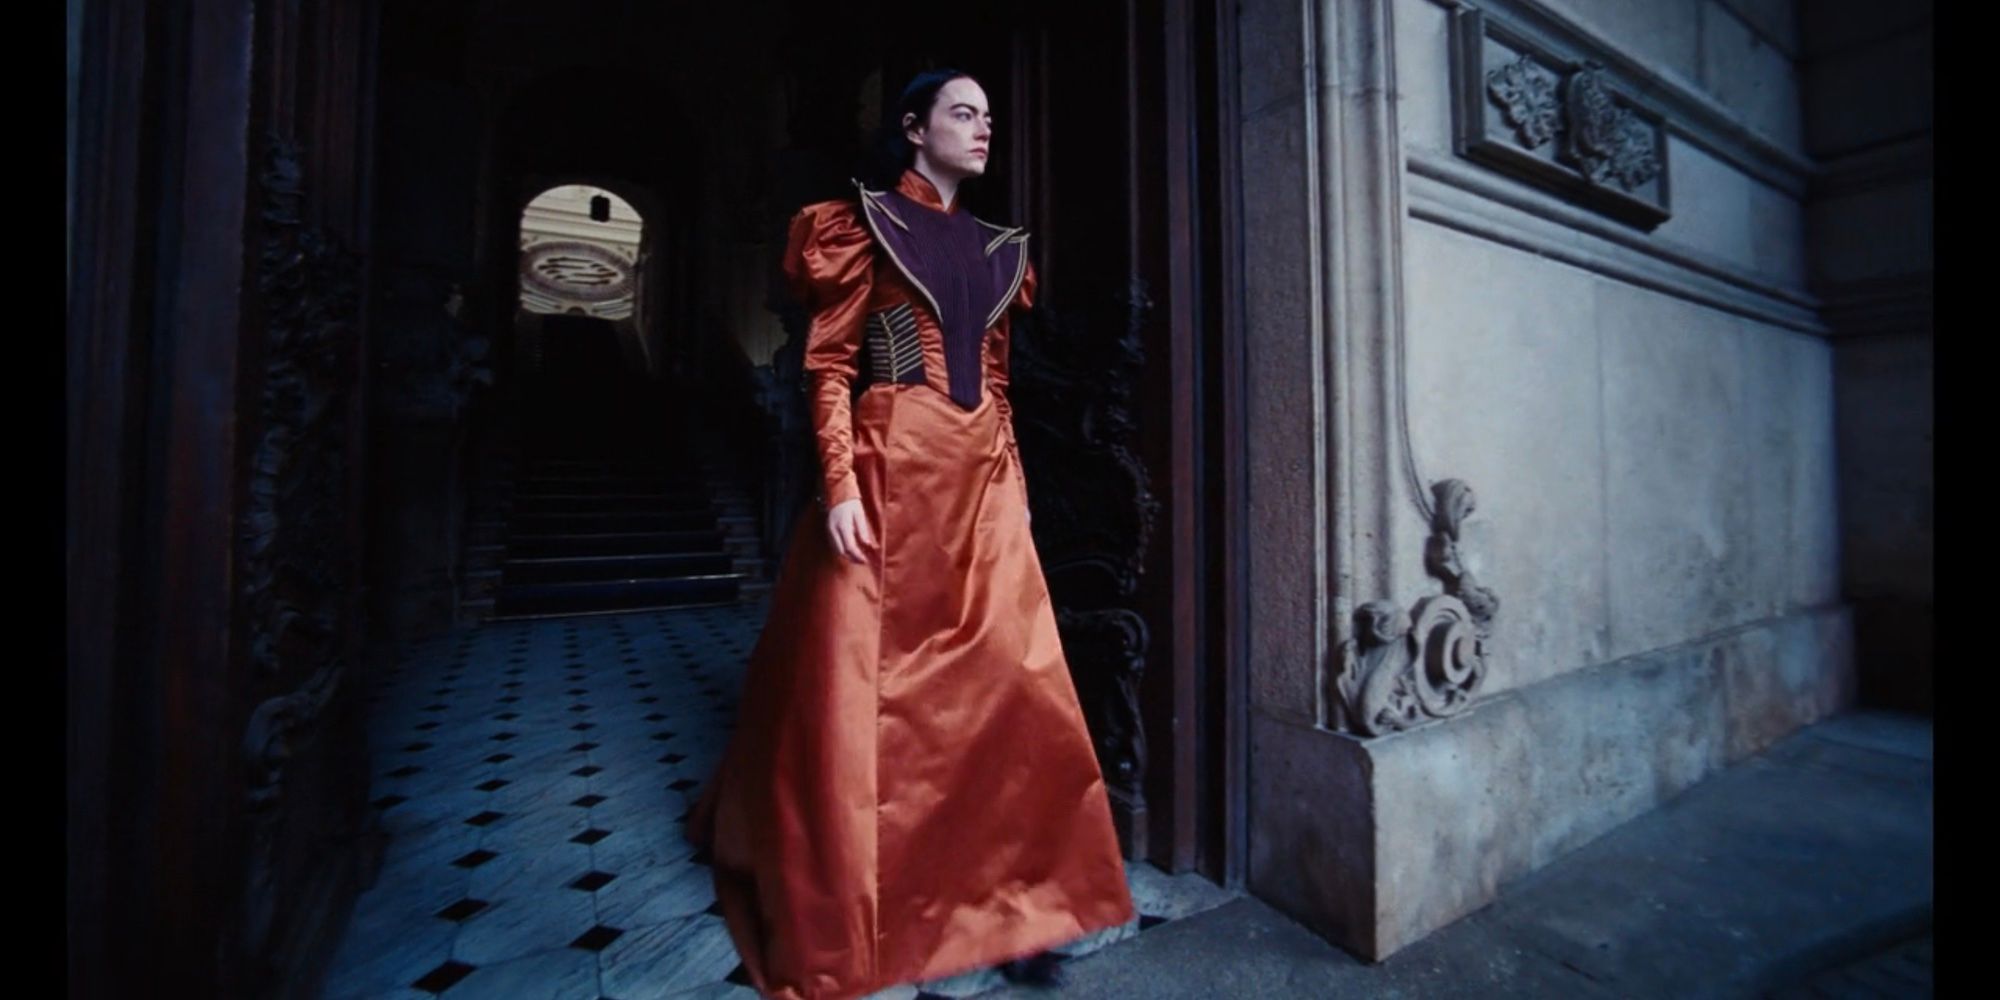 Bella Baxter (Emma Stone) wears an orange satin gown with purple detailing in Poor Things.